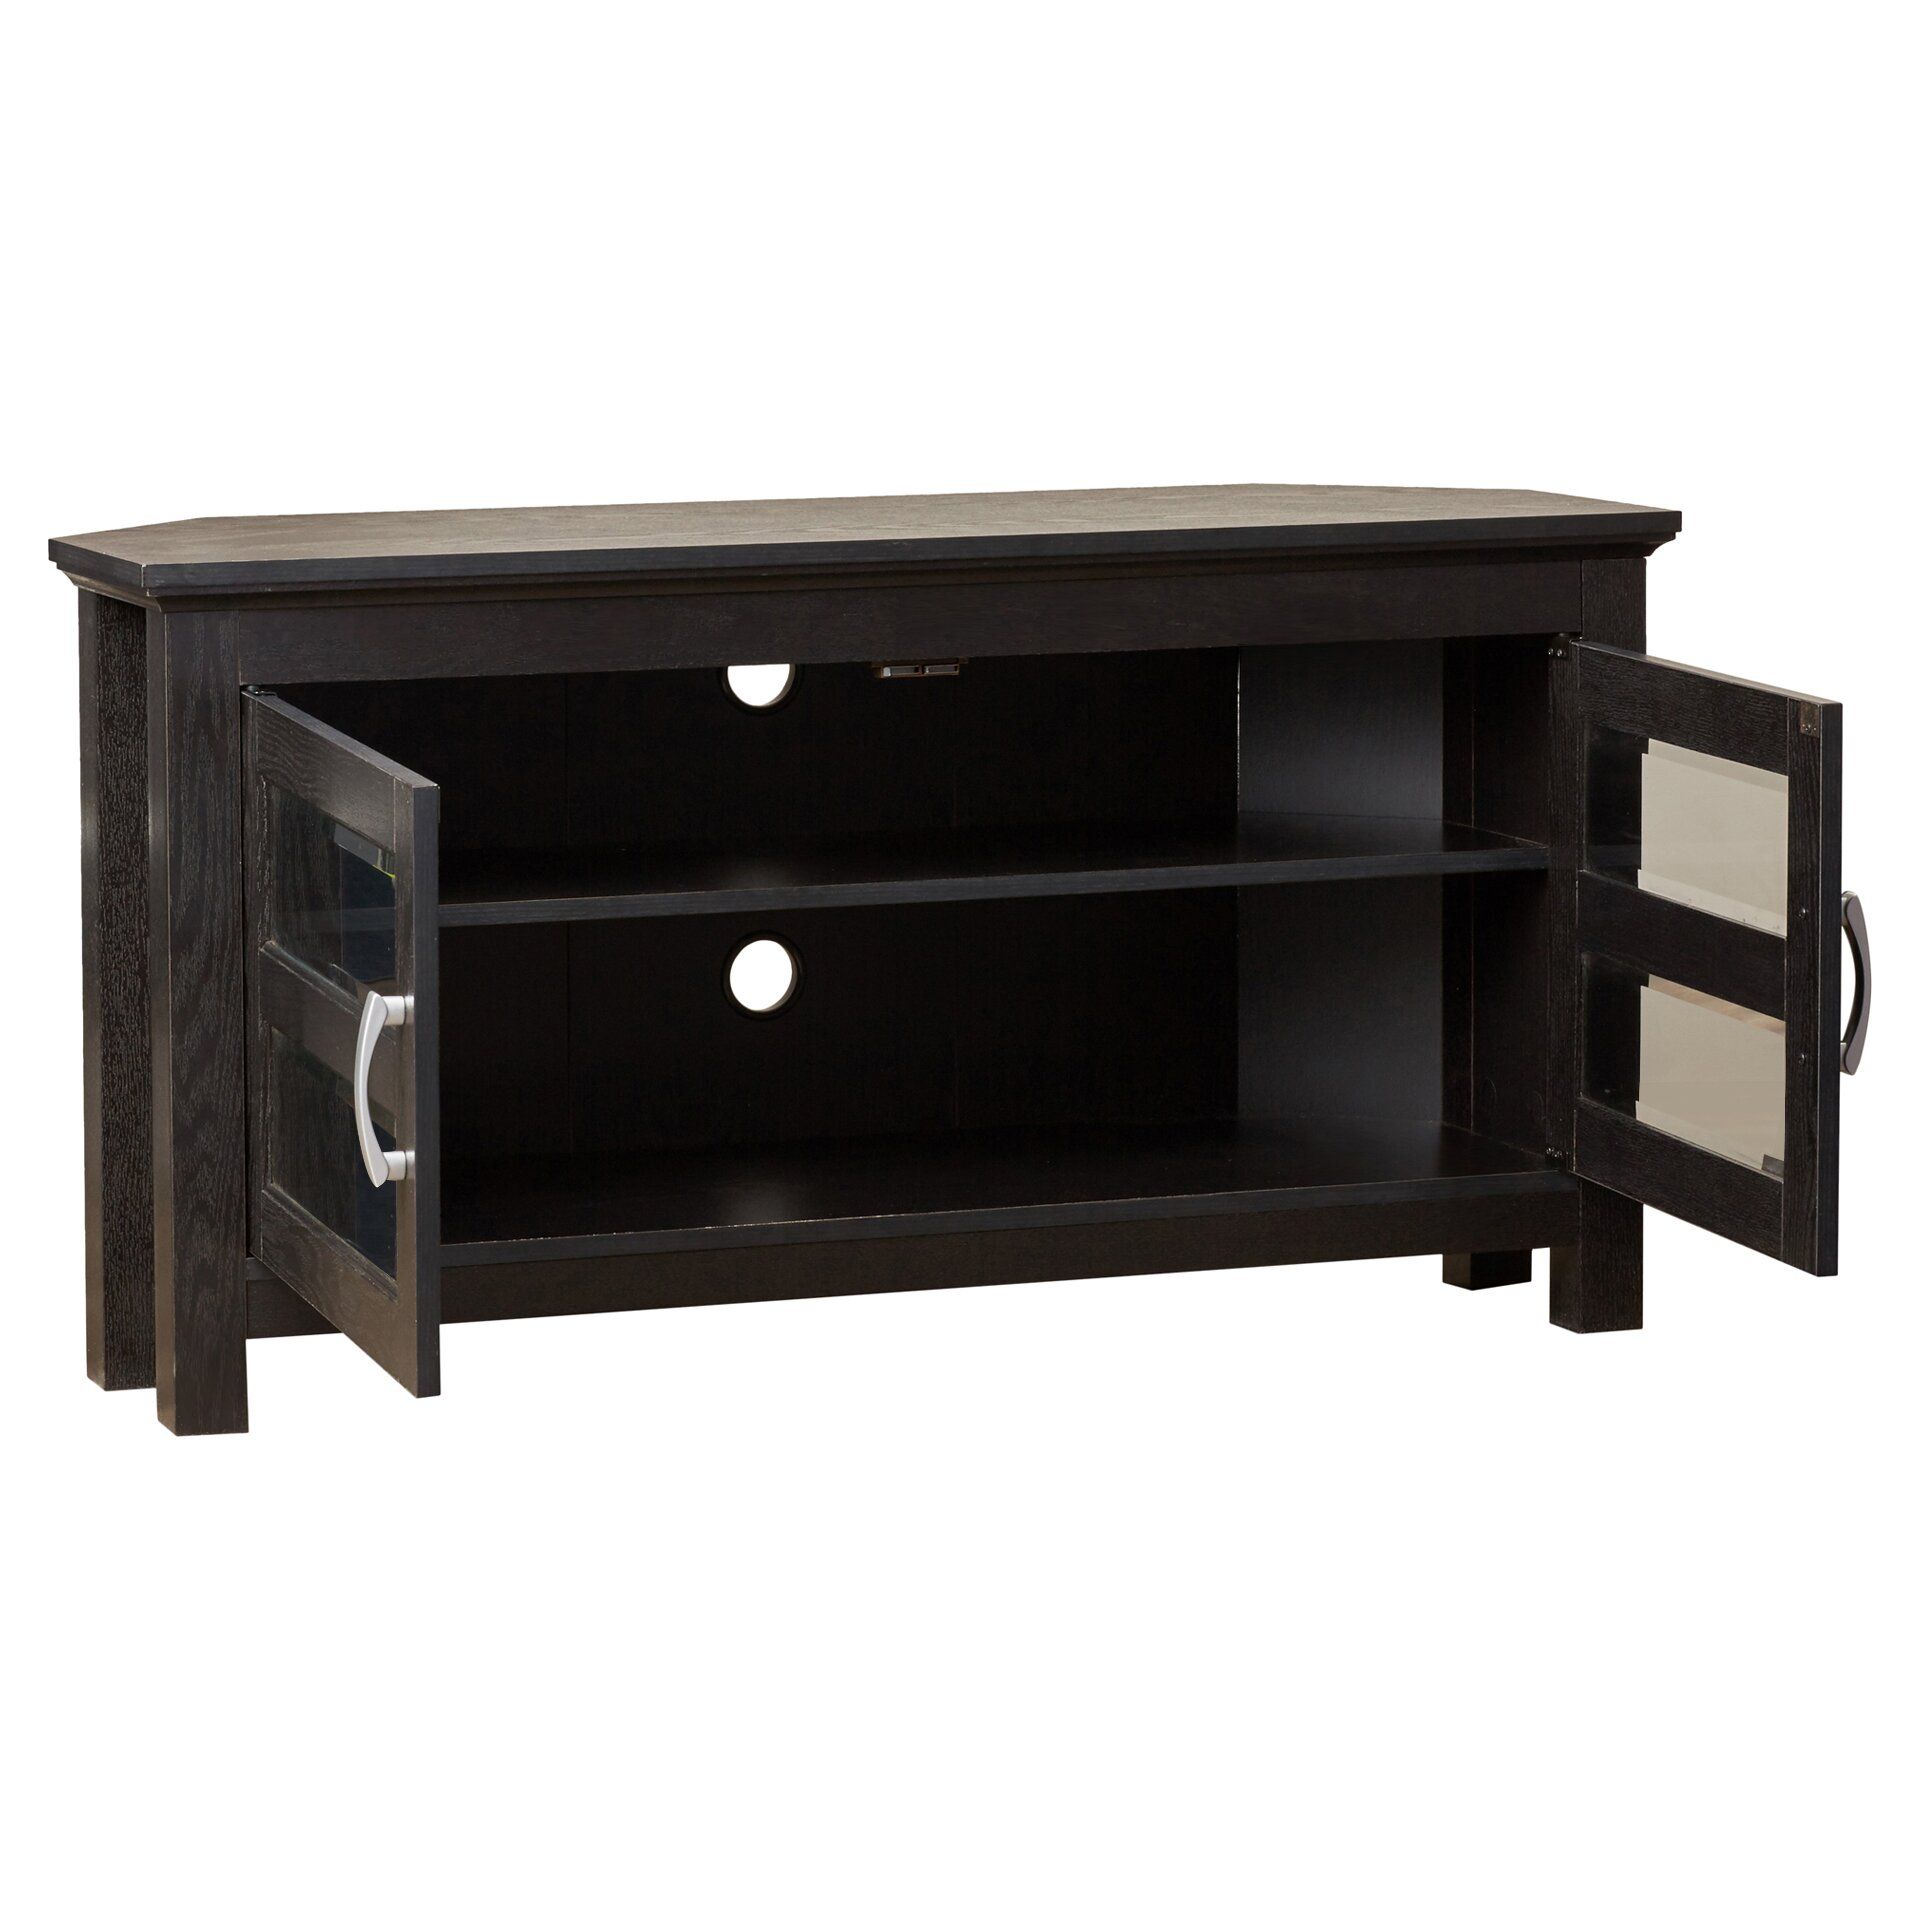 Alcott Hill Sulyard Wood Corner Tv Stand & Reviews | Wayfair For Wooden Corner Tv Stands (View 11 of 15)